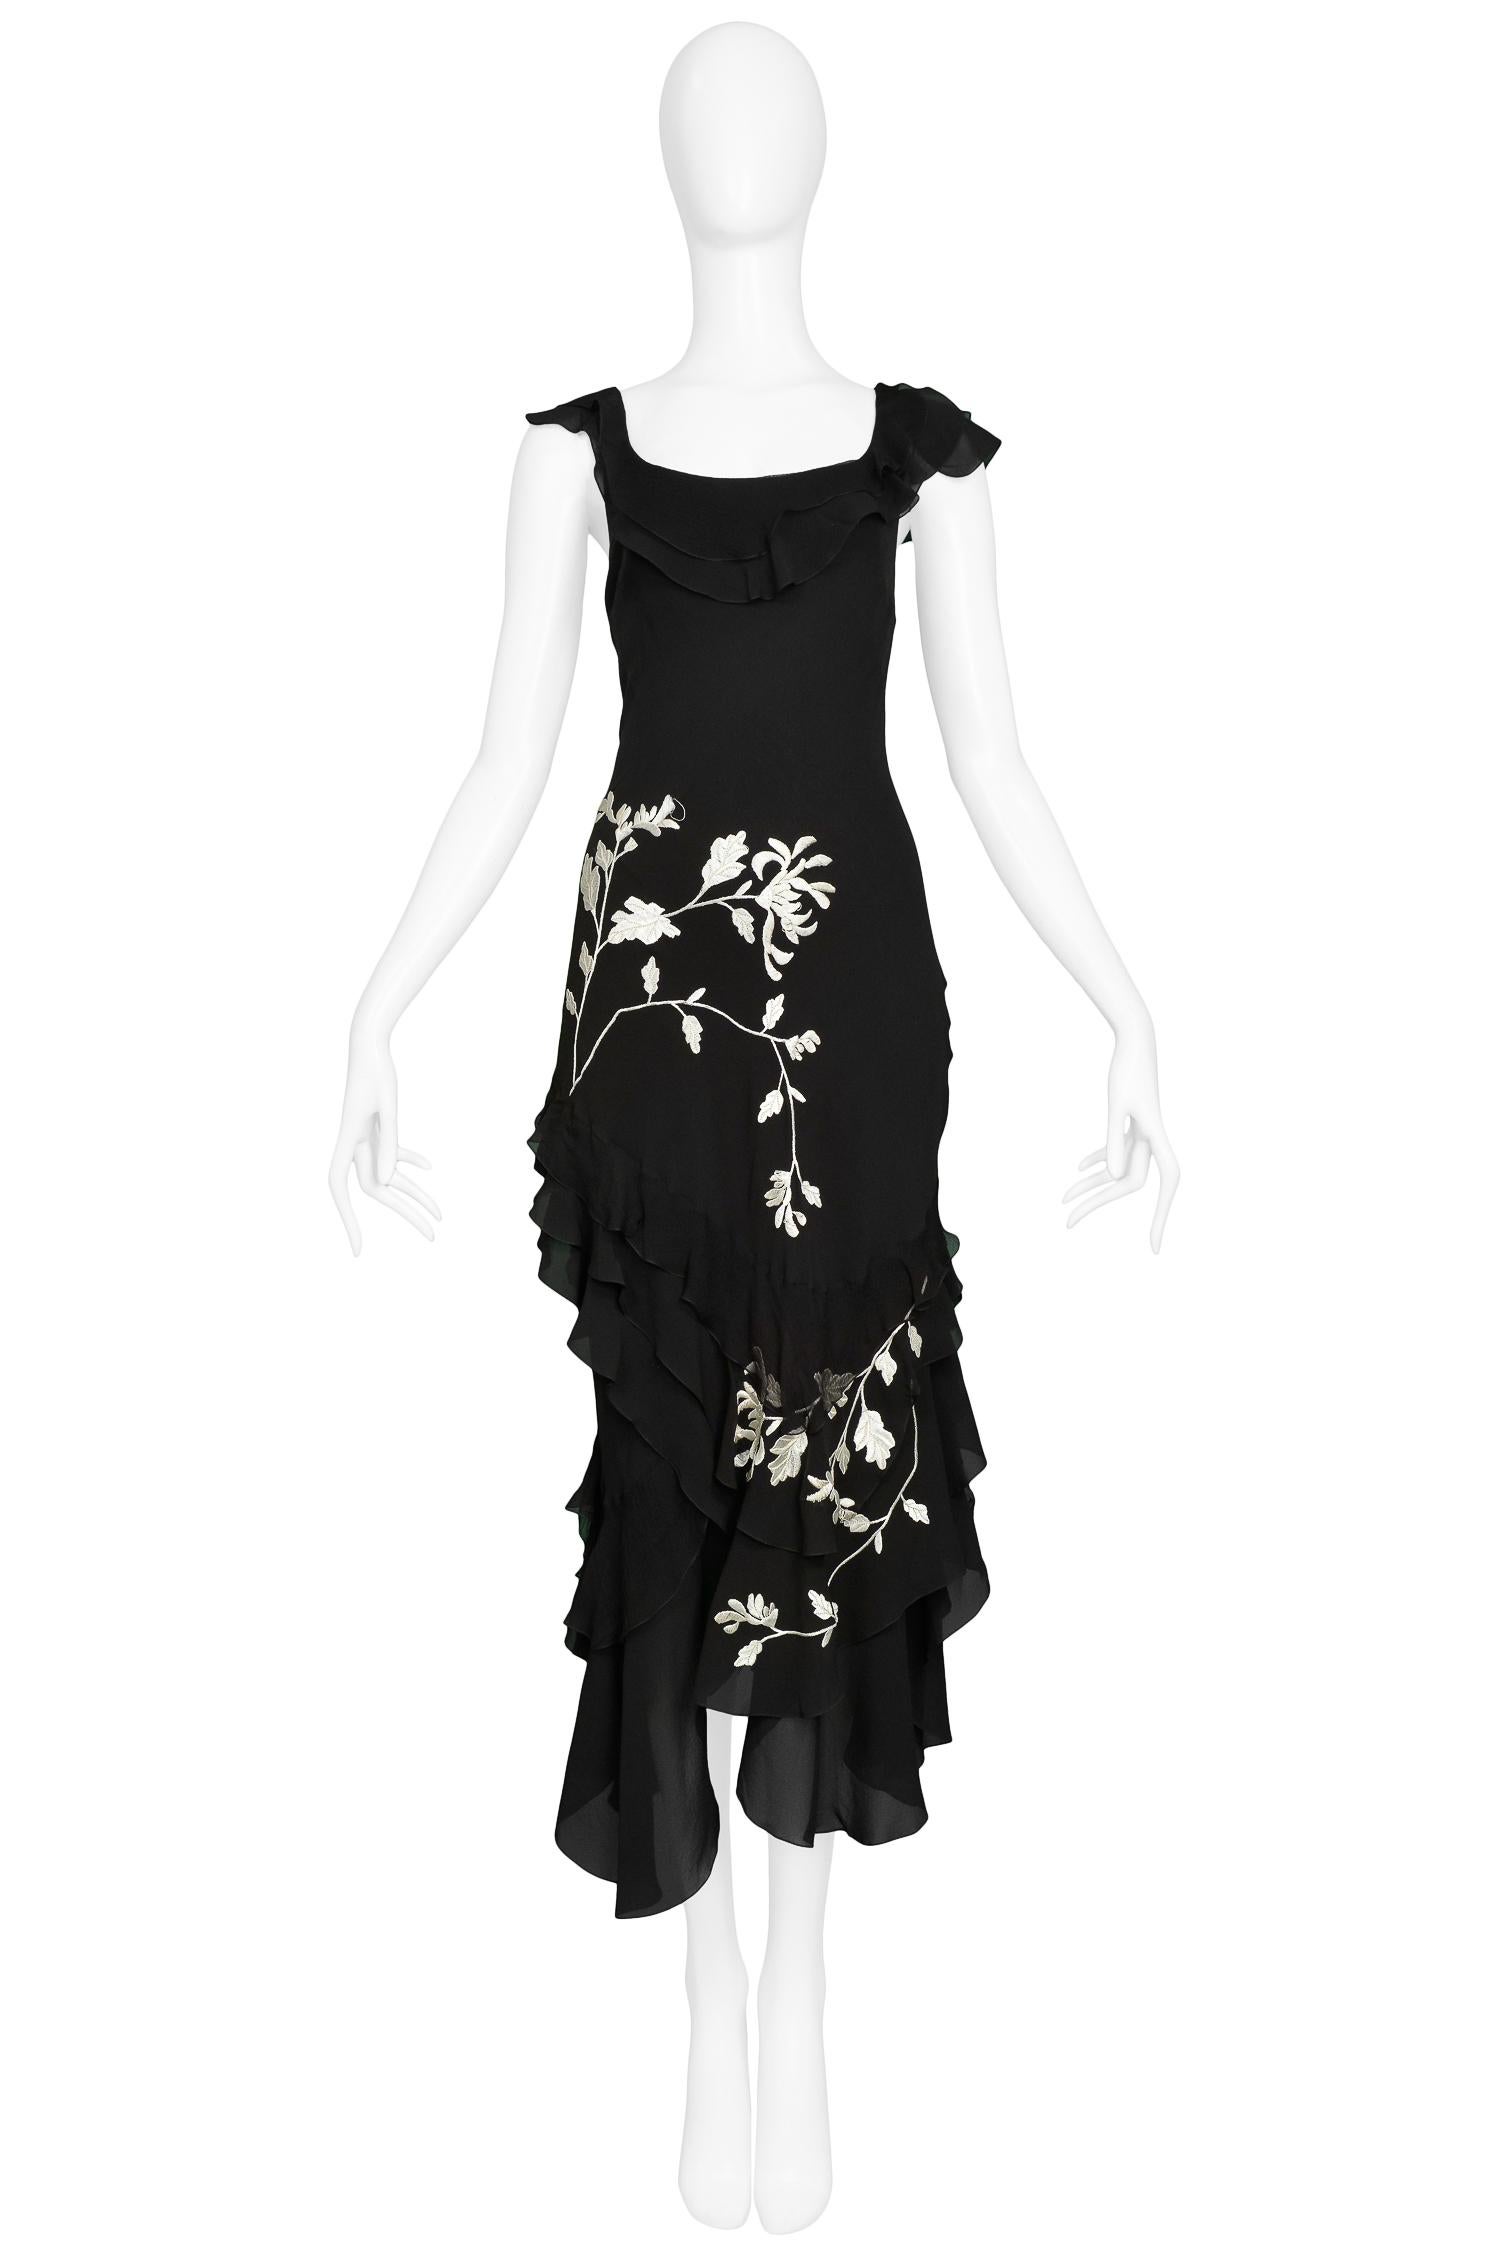 Vintage John Galliano black silk chiffon bias slip dress with white floral embroidery, ruffle hem, neckline & sleeves.

Excellent Condition.

Size: 38

Measurements:
Bust 32